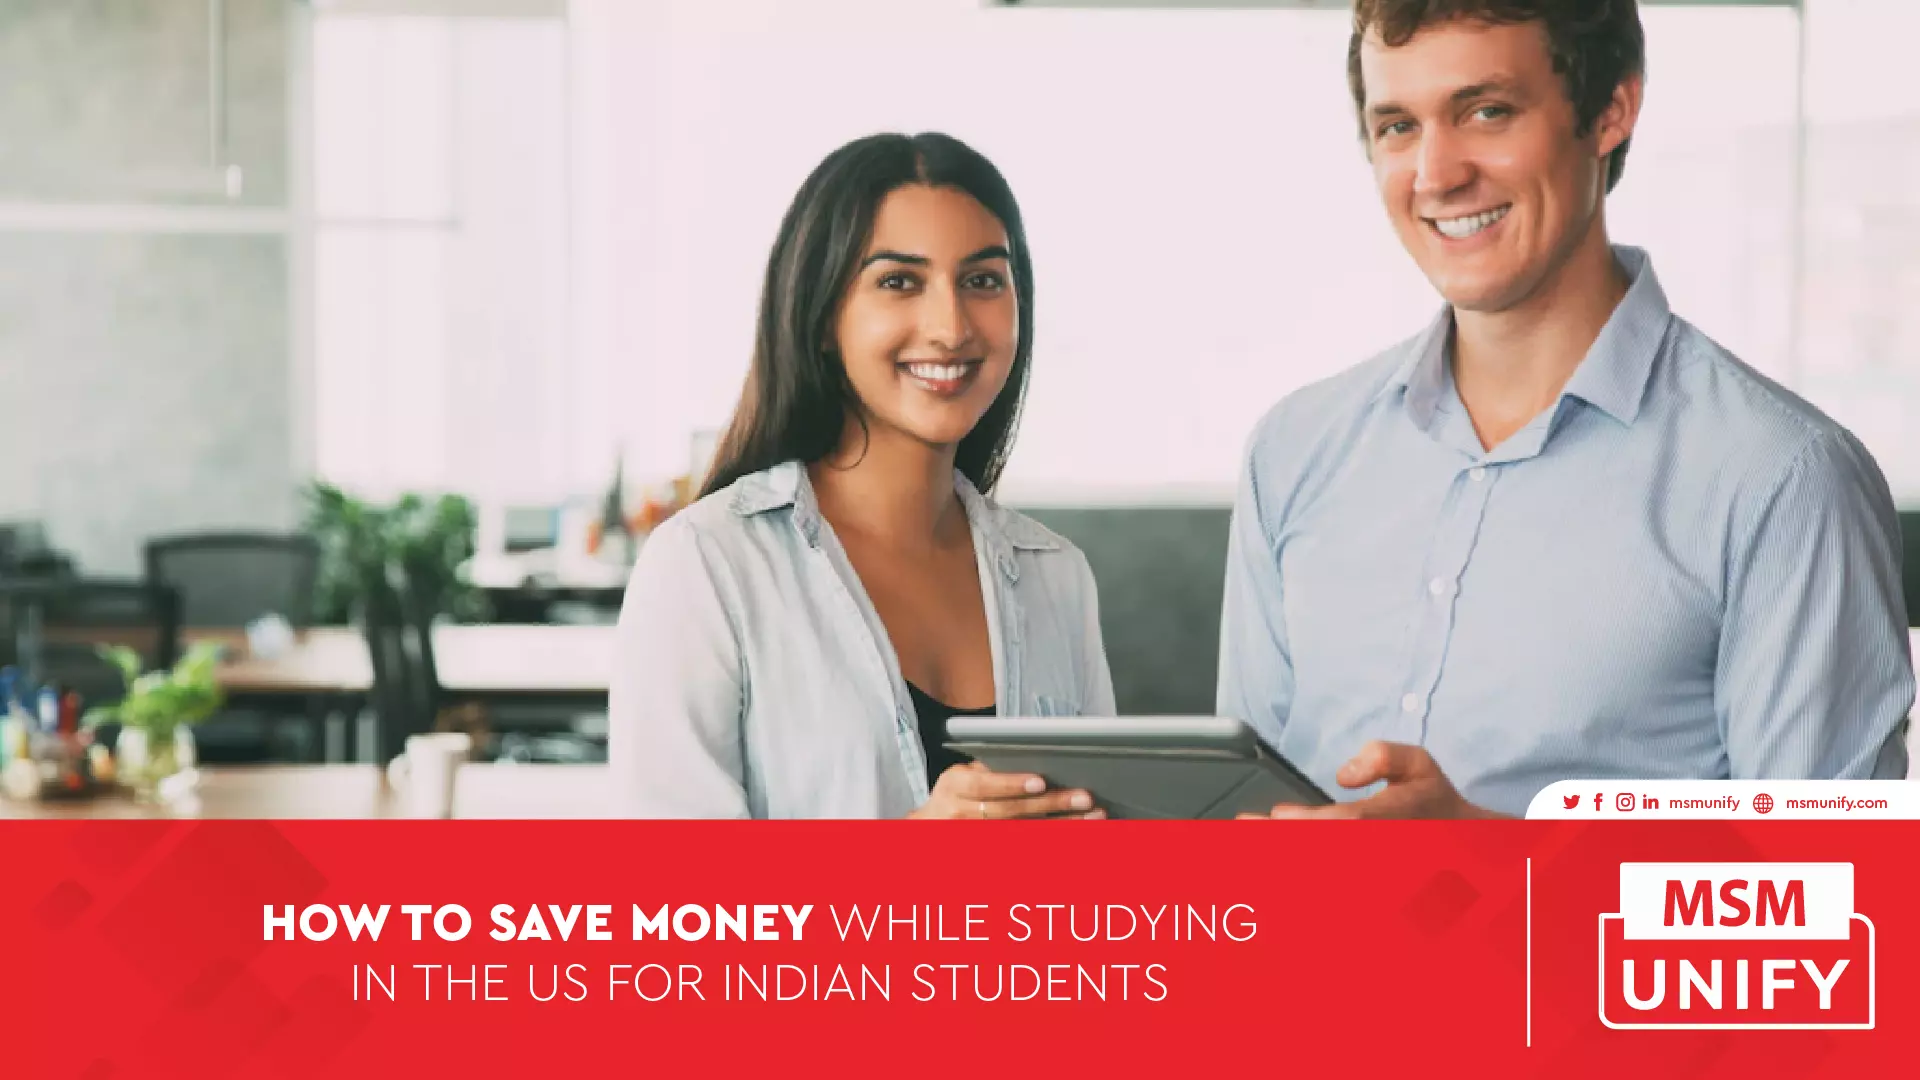 122022 MSM Unify How to Save Money While Studying in the UK for Indian Students 01